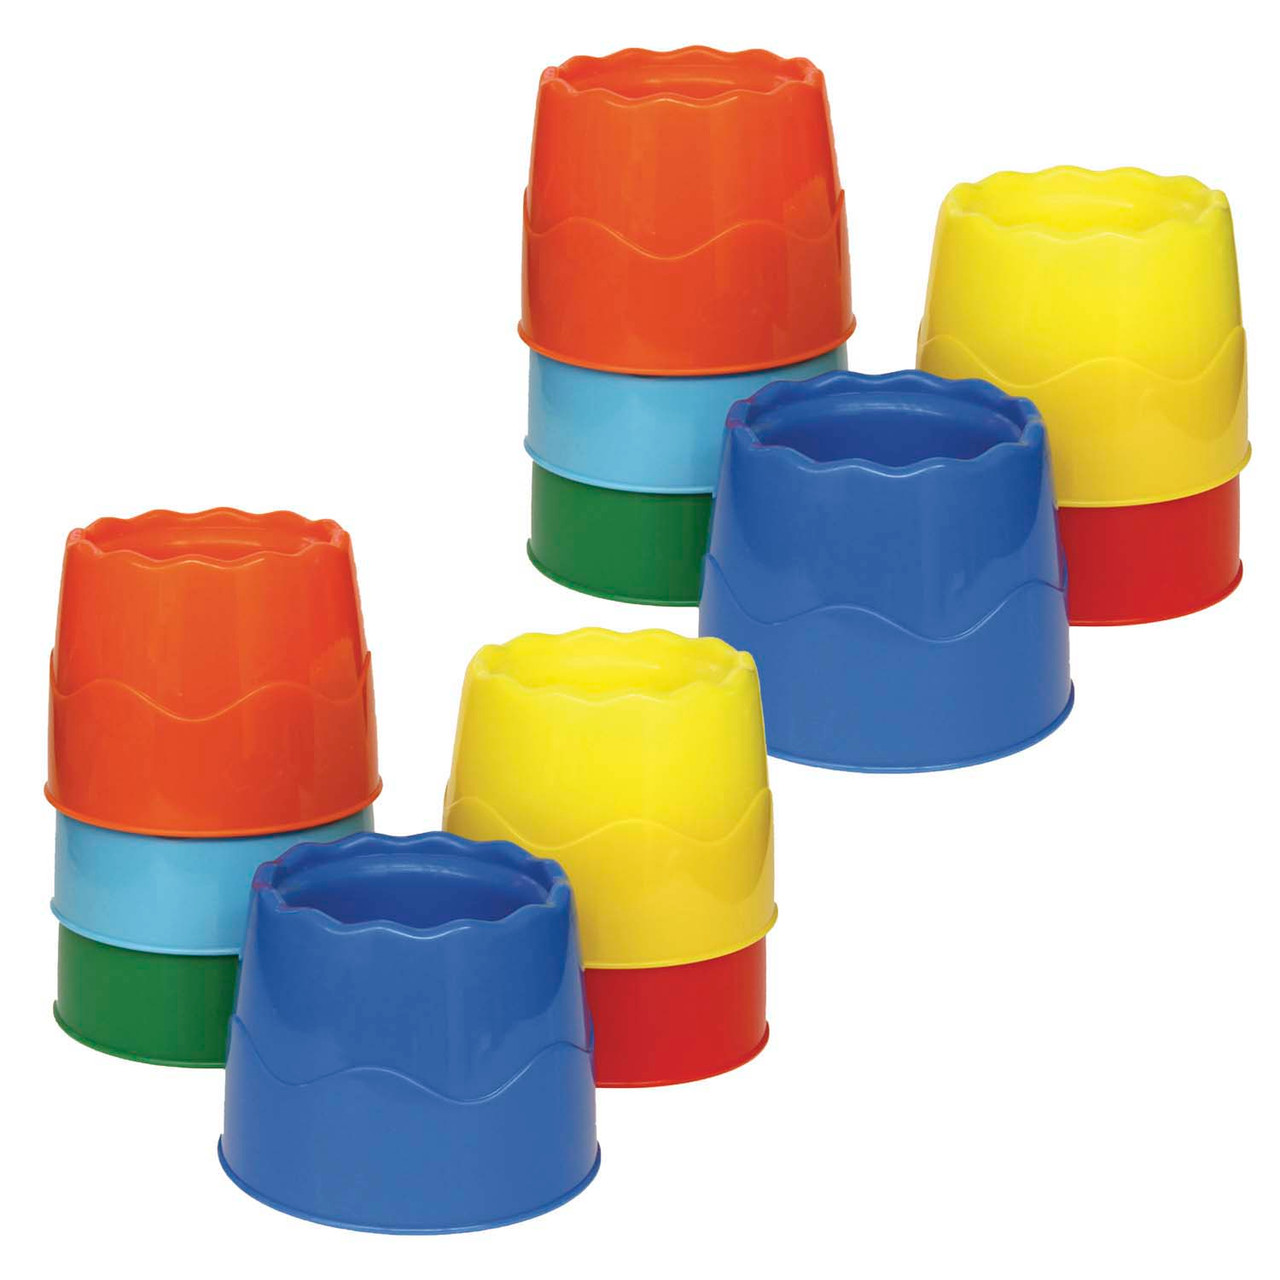 Large Stable Water Pots, Assorted Colours - Pack of 4, Paint Pots &  Palettes